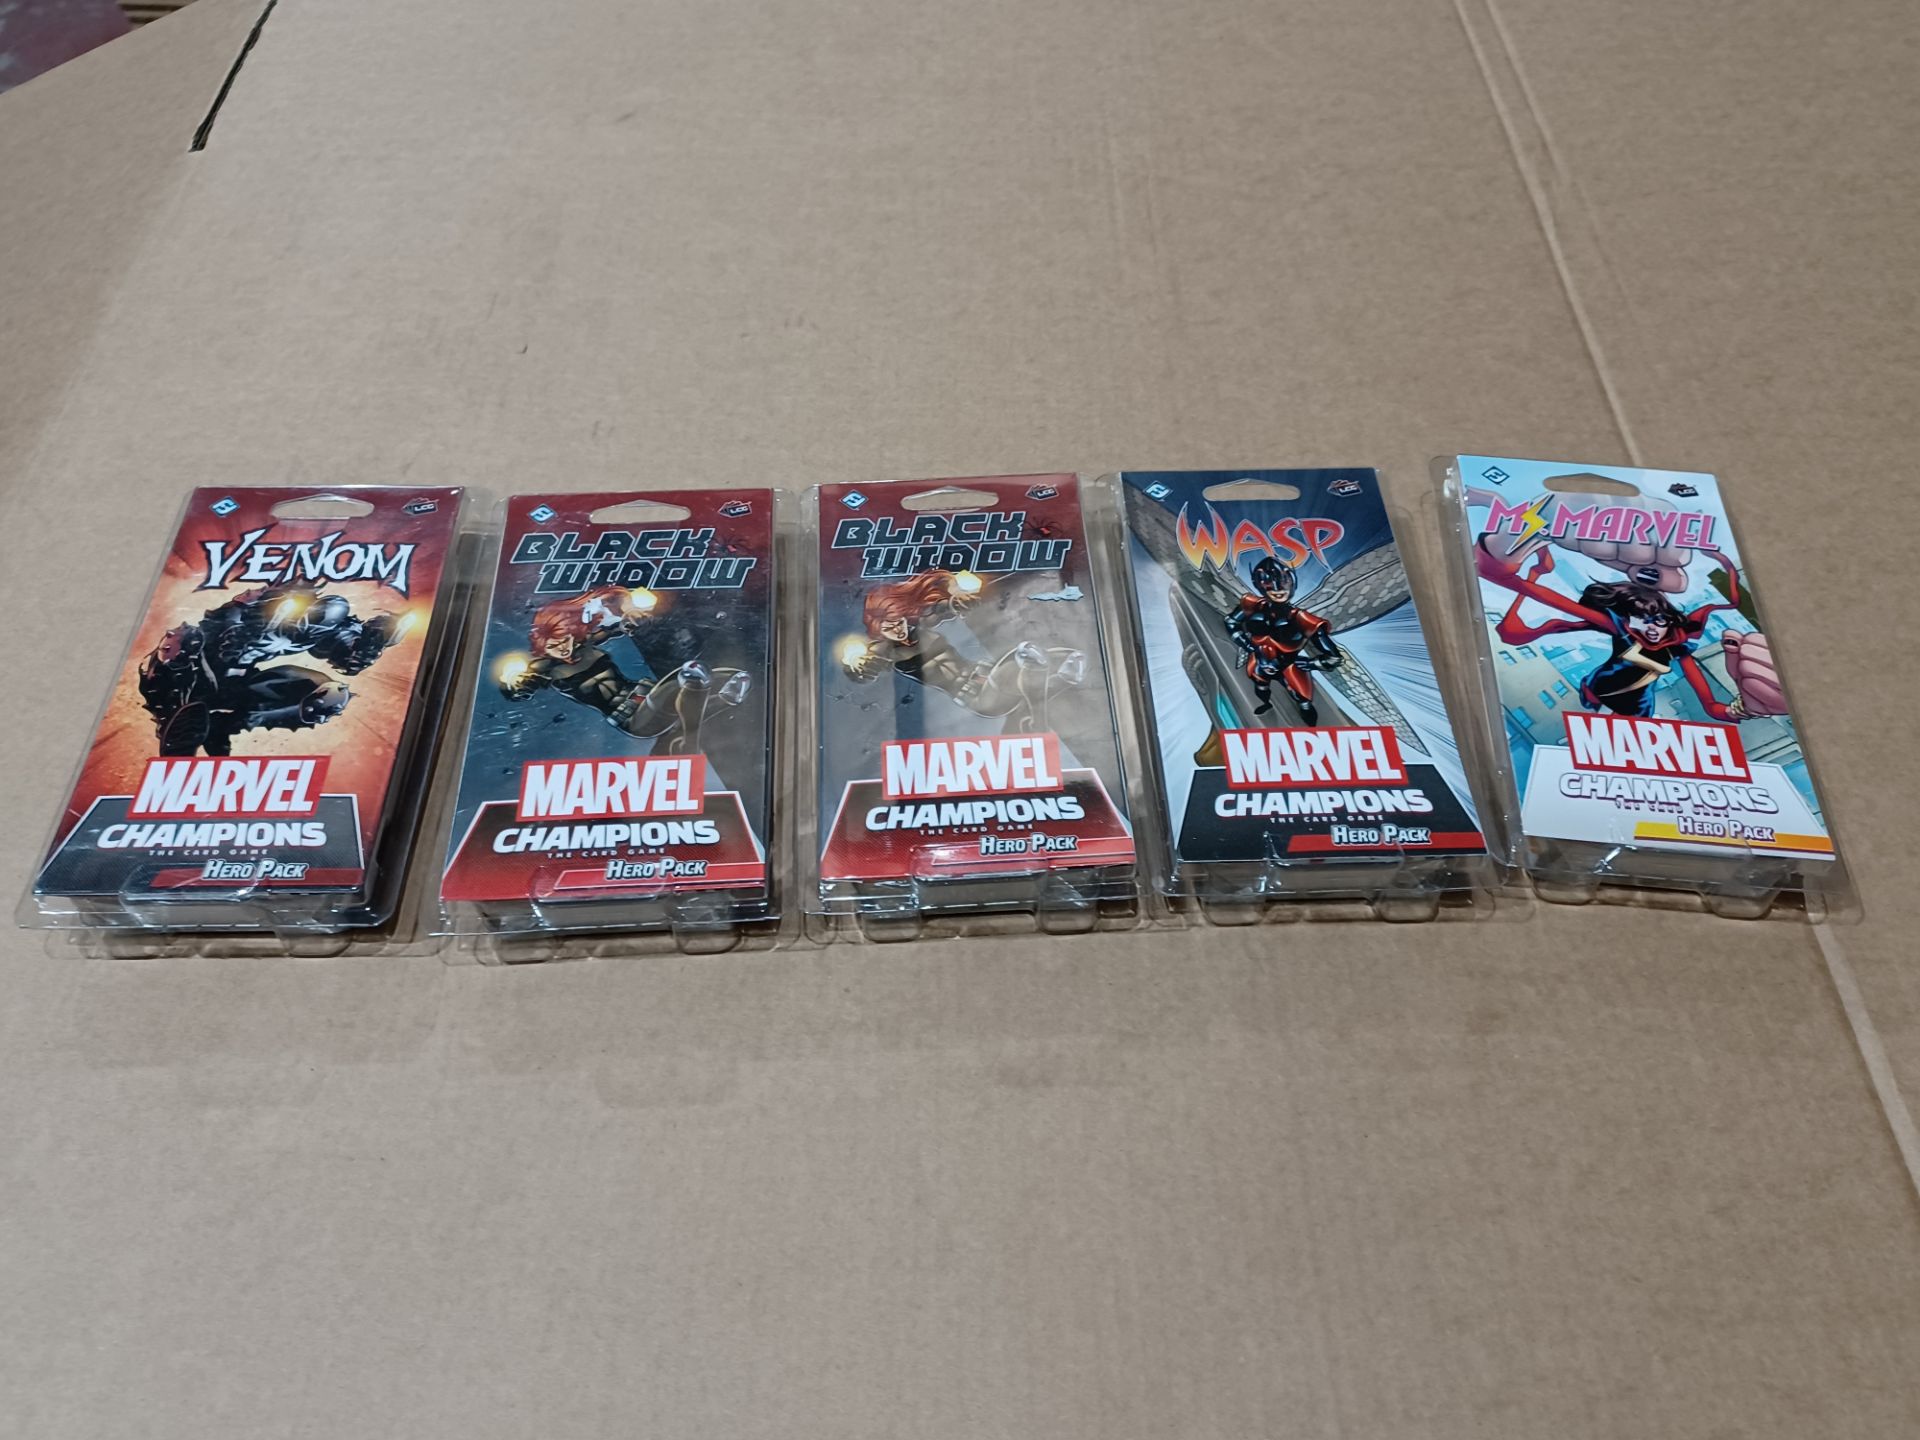 5 X MARVEL CHAMPIONS CARD GAME HERO PACK TO INCLUDE; BLACK WIDOW, WASP, BLACK WIDOW AND MORE RRP £